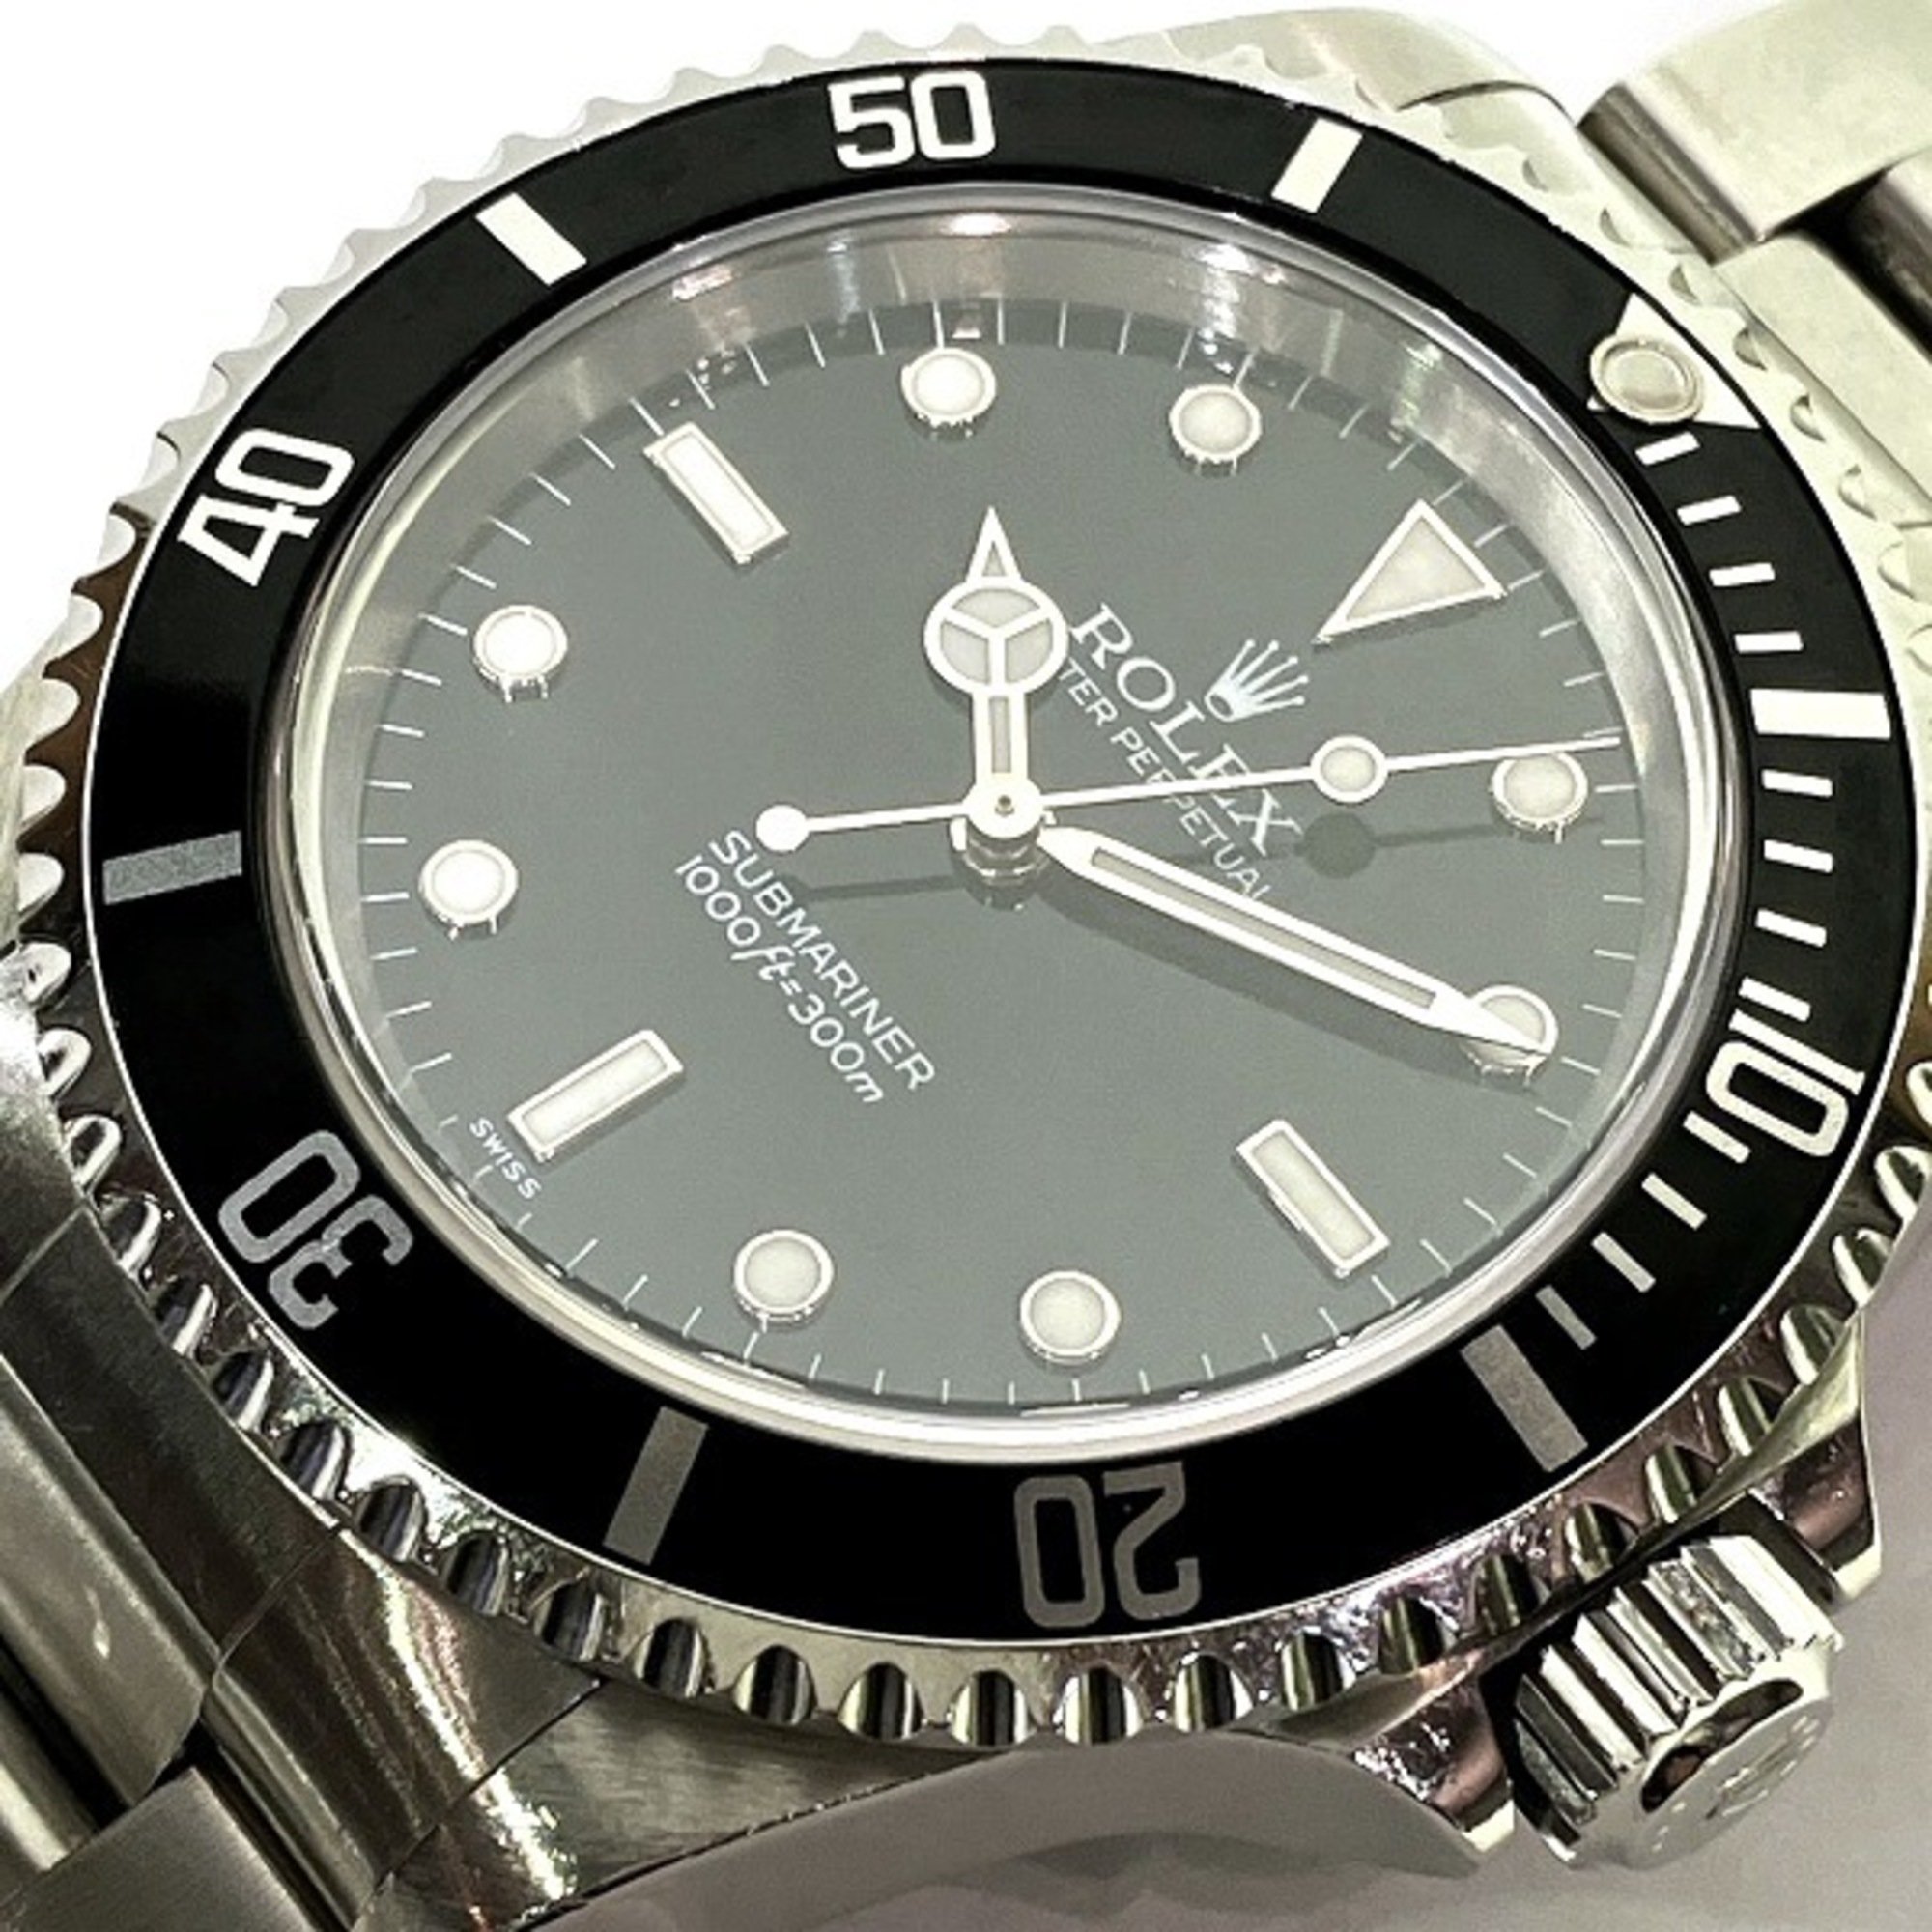 Rolex Submariner 14060 Automatic A Series Watch Men's